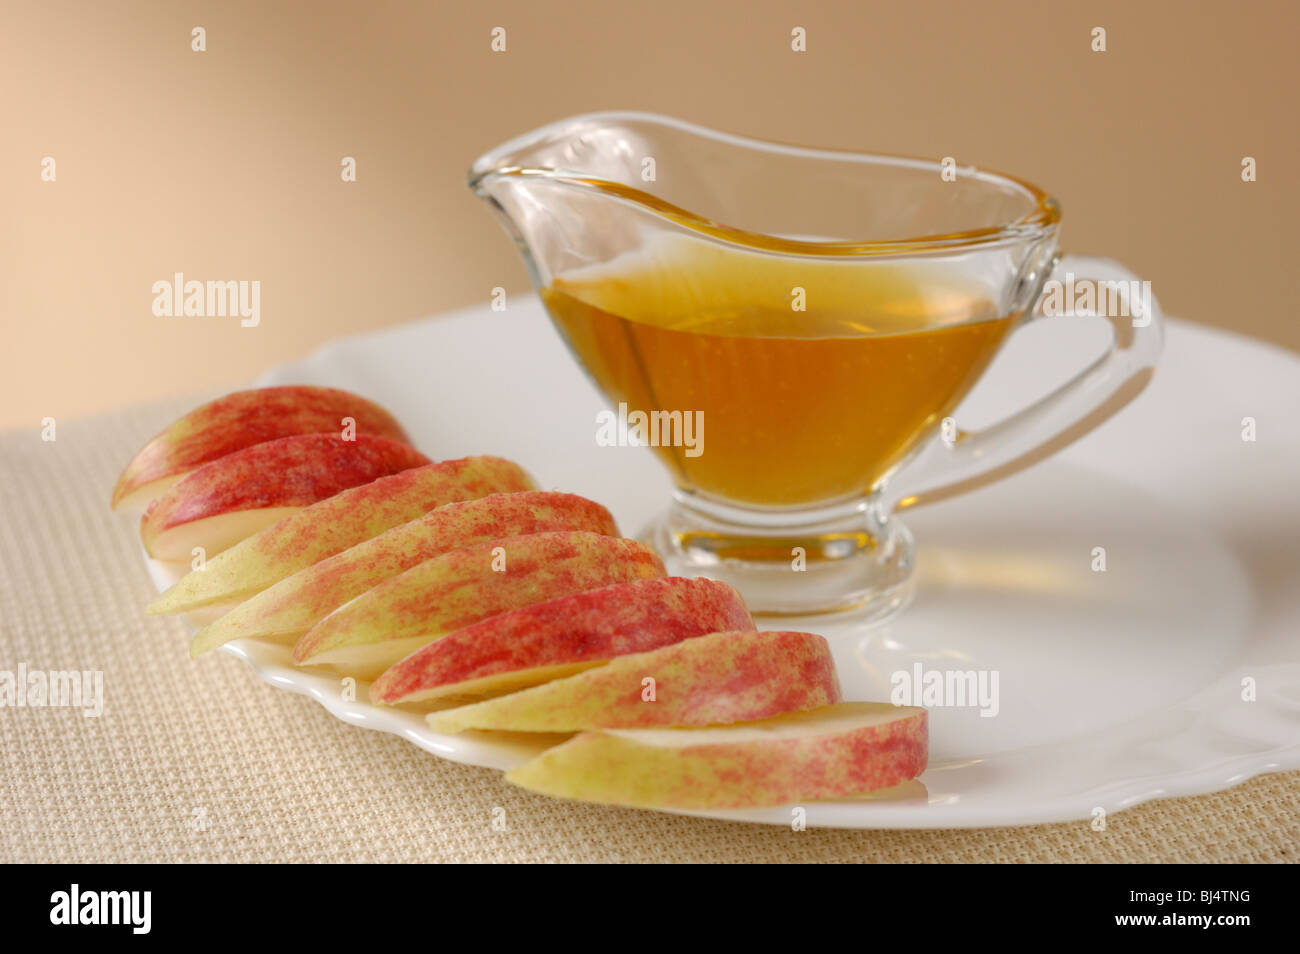 Slices of apple on plate and honey still life Stock Photo